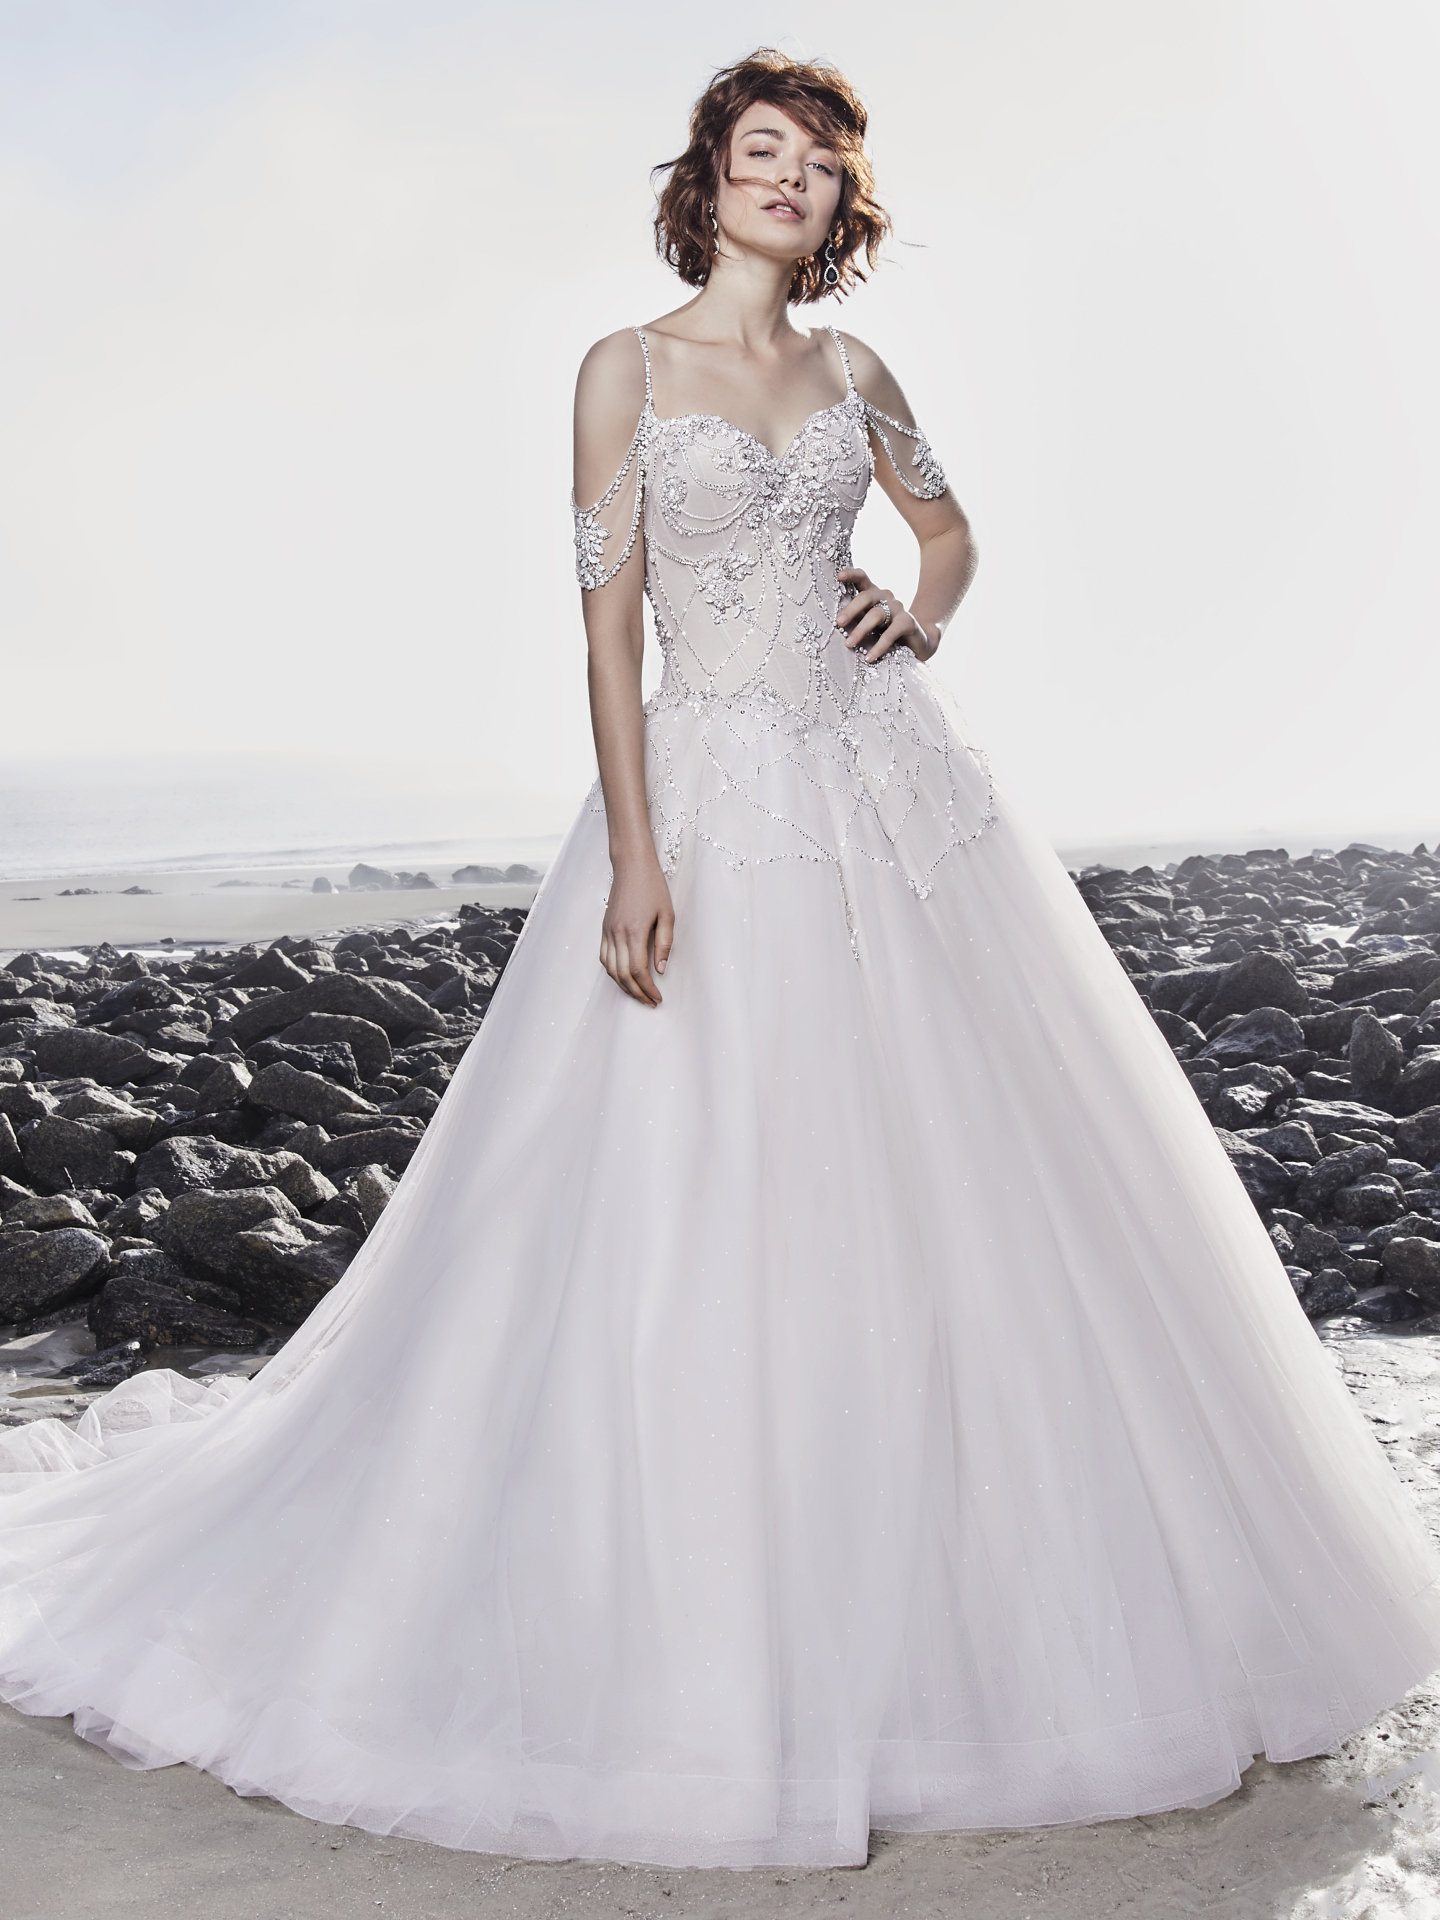 The Latest Glitzy, Red-Carpet-Ready Styles from Sottero and Midgley